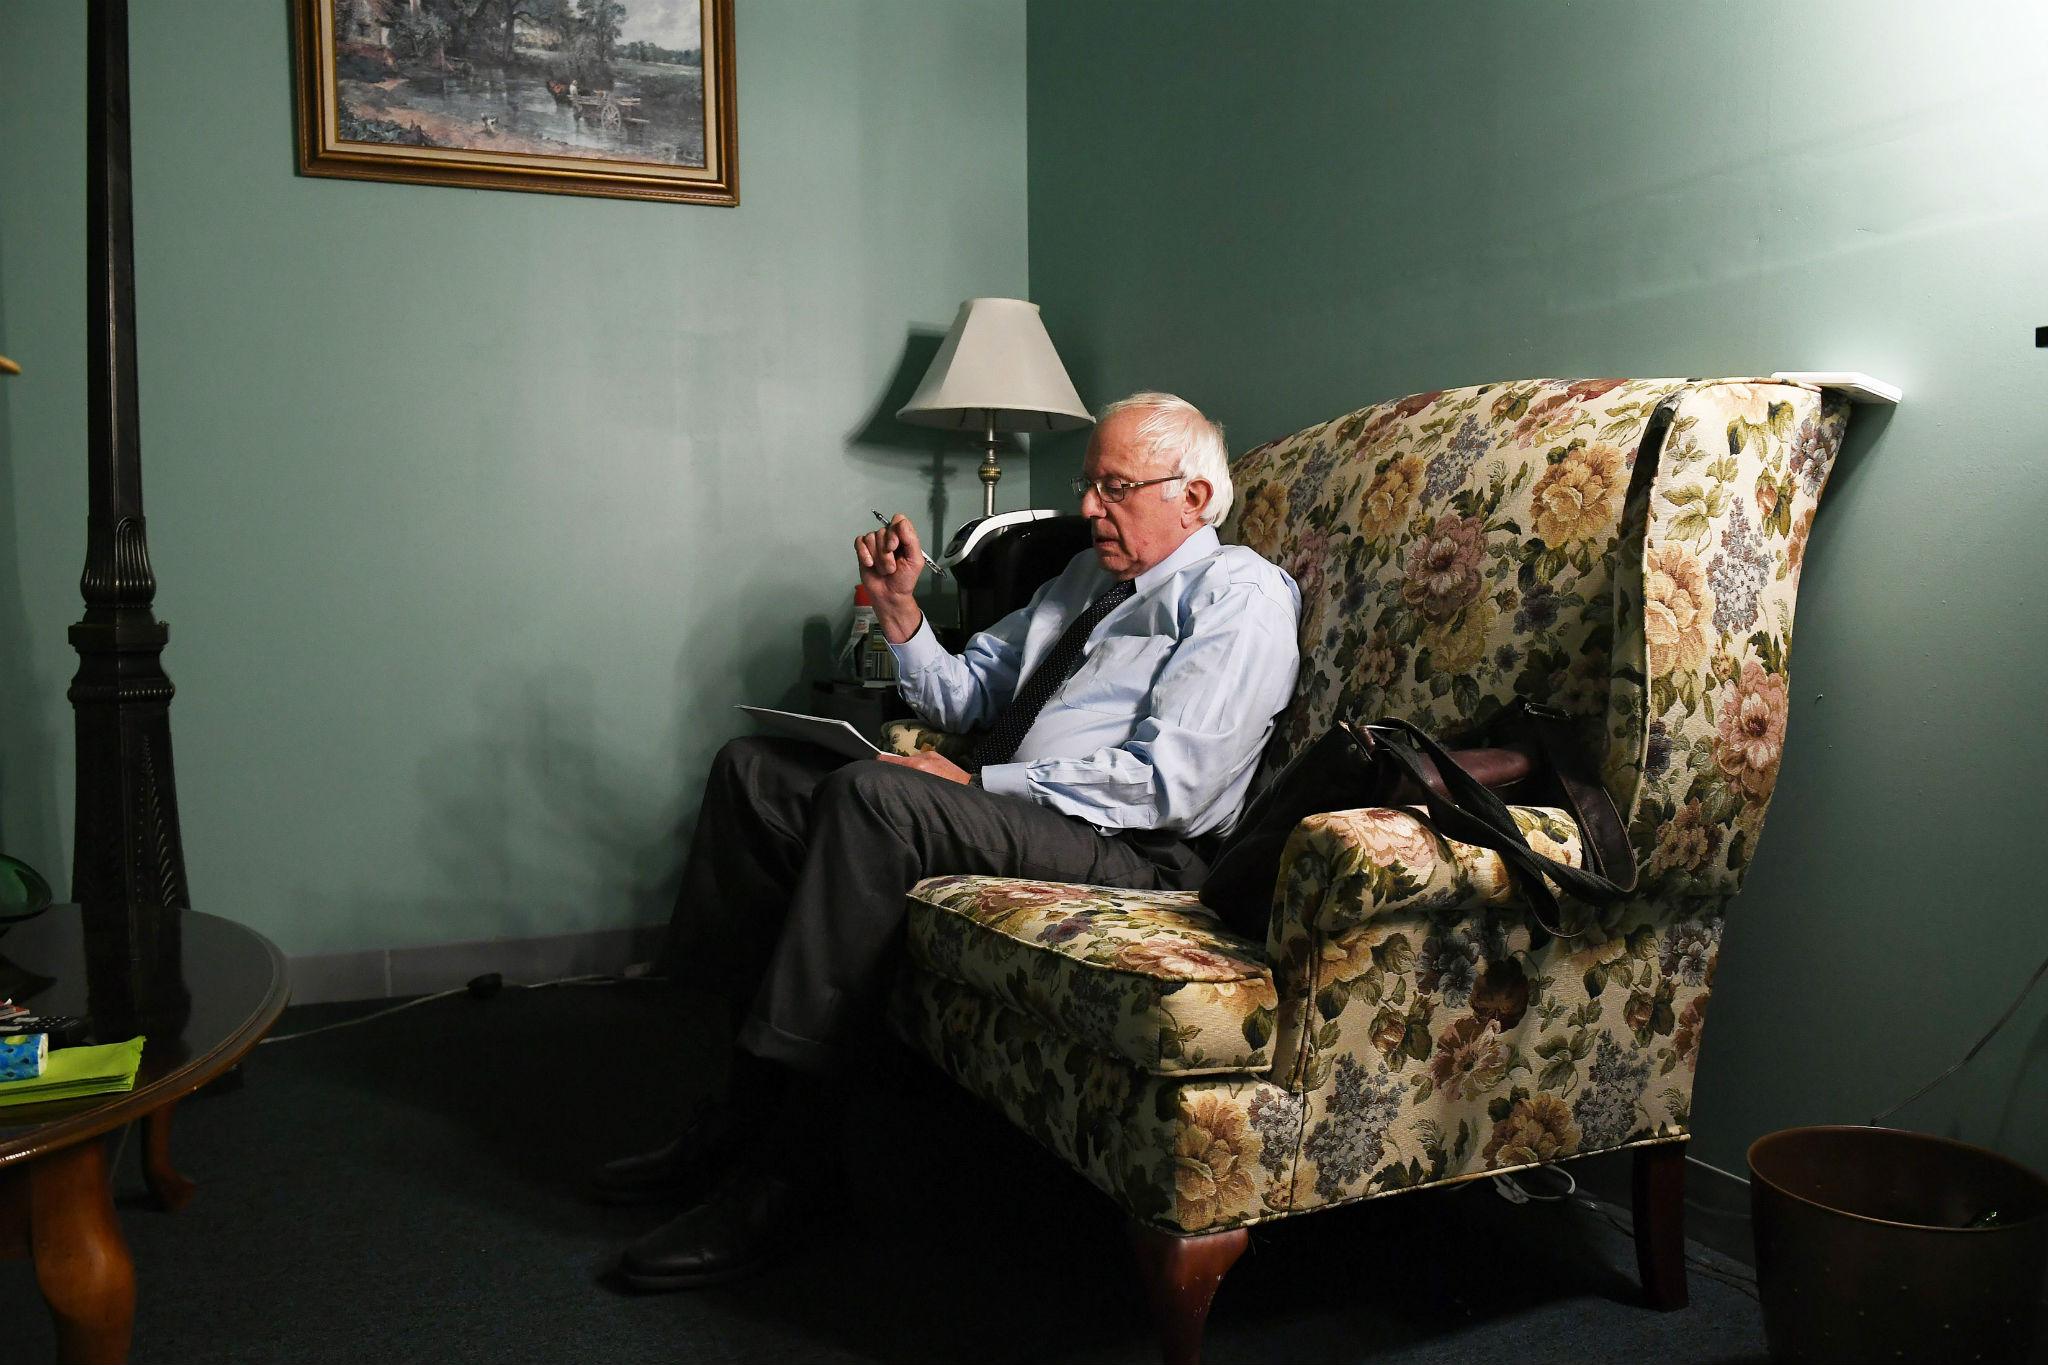 Senator Bernie Sanders prepares to address supporters in a live streamed video from his hometown of Burlington, Vermont